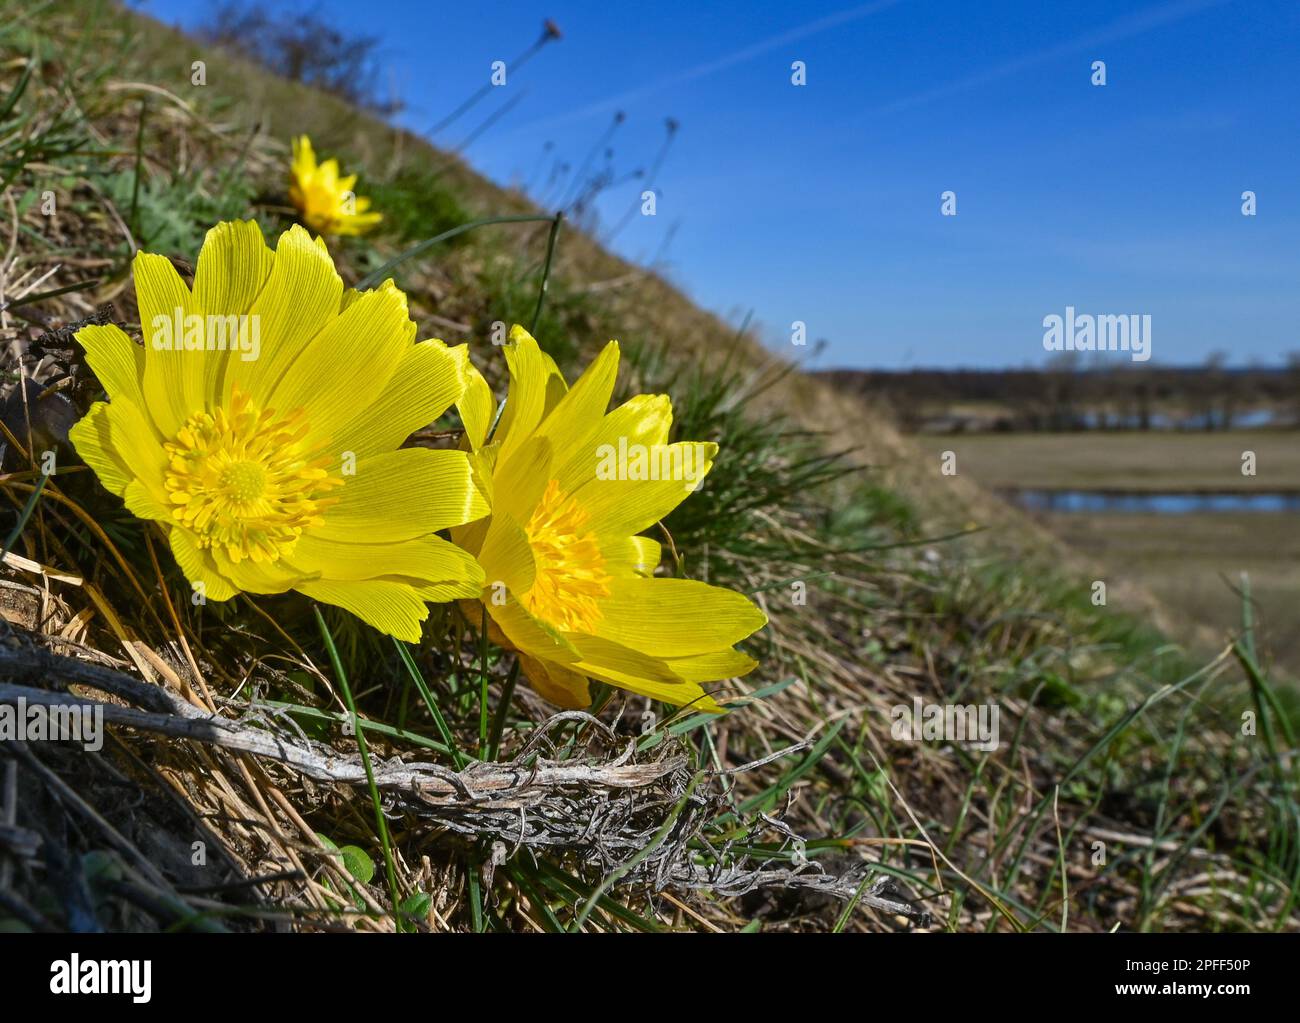 16 March 2023, Brandenburg, Lebus: Adonis florets bloom on the Oder slope in the district of Märkisch-Oderland. The mild temperatures and warm sunshine of the last few days have led to the first Adonis florets blooming. The area between Lebus on the Oder and Mallnow on the Oderbruch rim in East Brandenburg is one of the largest contiguous Adonis rose areas in Europe. In Brandenburg, these strictly protected species only occur on the Pontic slopes north of Frankfurt (Oder). For the poisonous flowers, the area was declared a Trockerasen nature reserve in 1984. Photo: Patrick Pleul/dpa Stock Photo